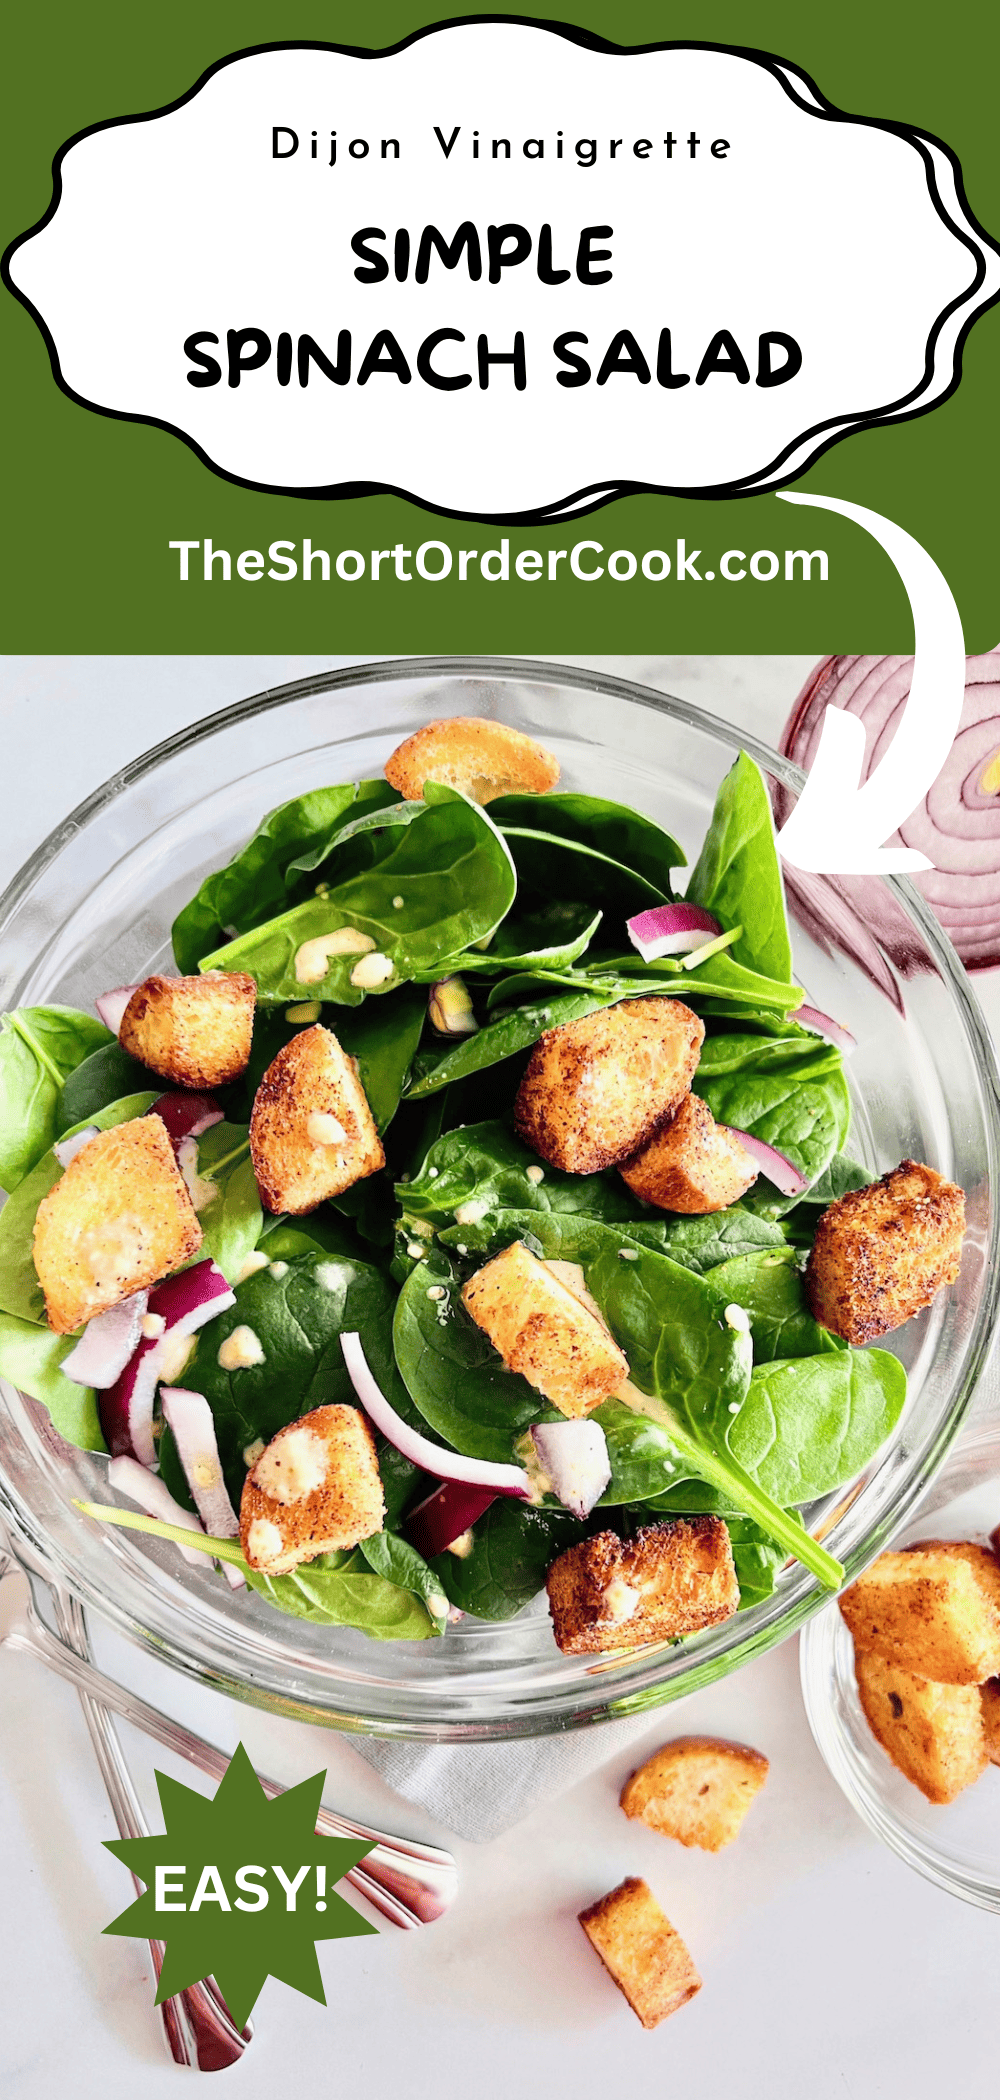 Simple salad of baby spinach, croutons, & onion with a mustard dressing.